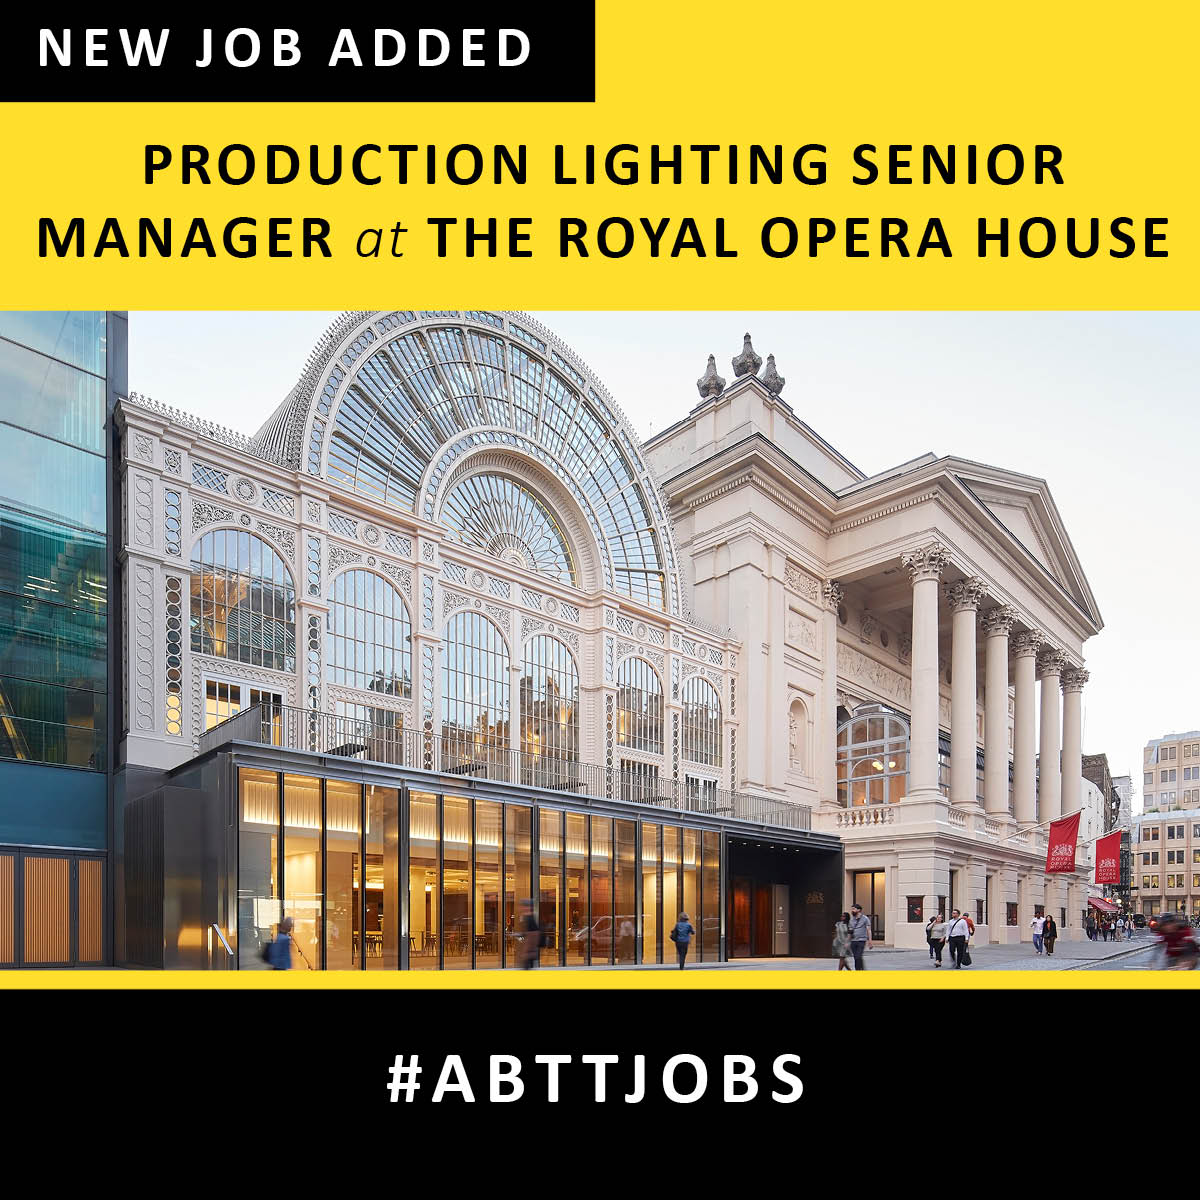 The Royal Opera House are looking to appoint a Senior Manager to lead one of four Production Lighting Teams, with responsibility for the delivery of shows alongside the Stage and Production Management teams. 

Find out more & apply: abtt.org.uk/jobs/productio…

#ABTTjobs #Theatrejobs